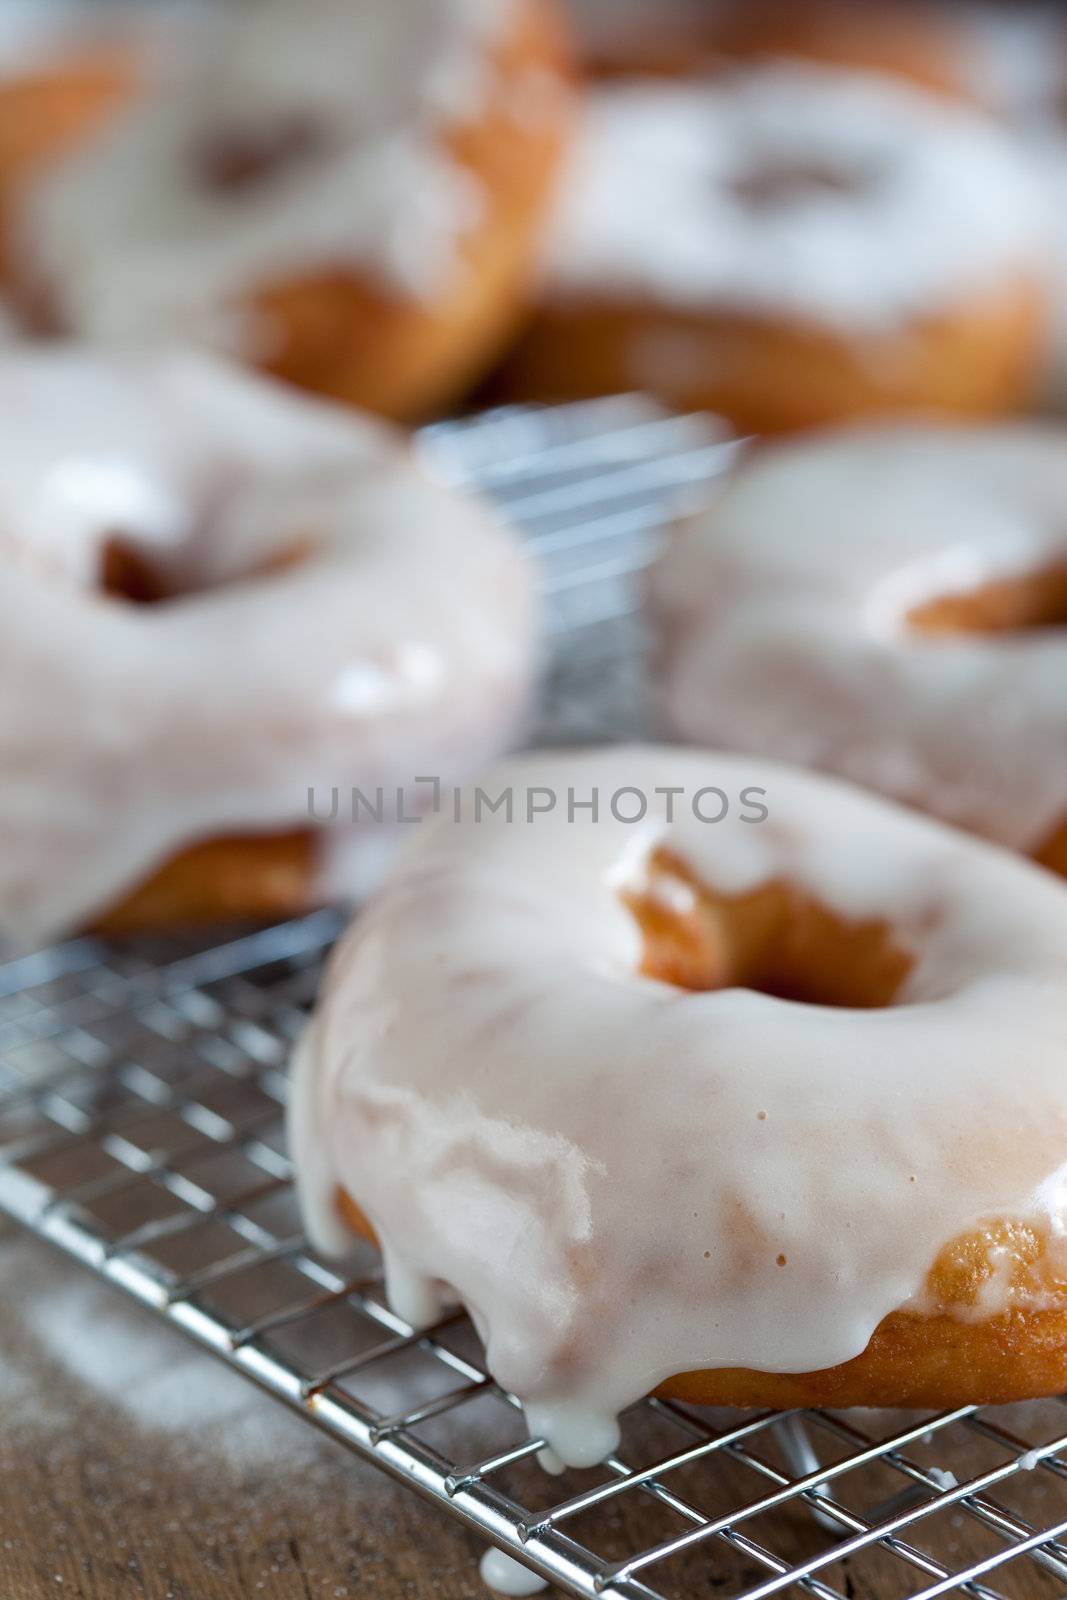 Doughnuts with fresh icing by Fotosmurf